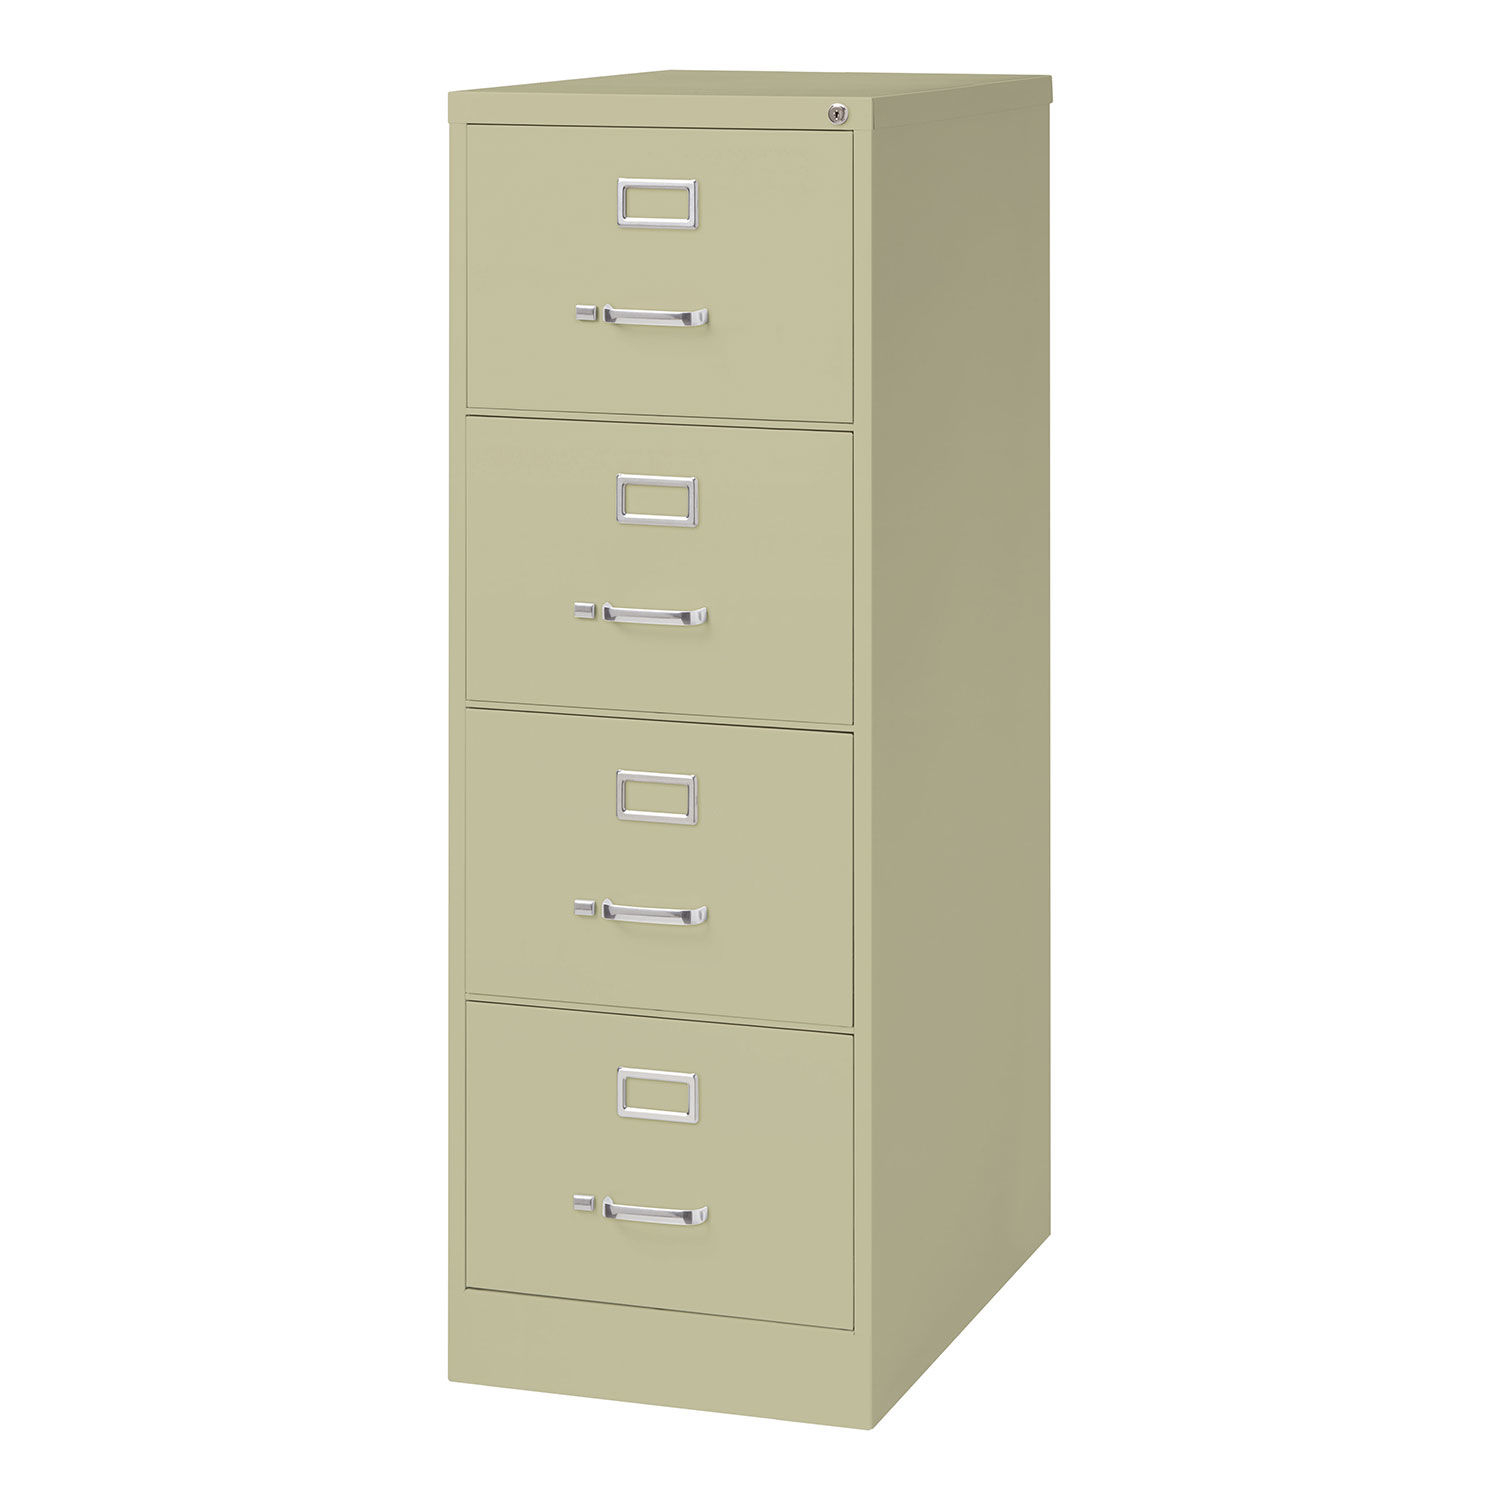 Details About Hirsh Industries 26 12 Deep Vertical File Cabinet 4 Drawer Legal Size Putty inside sizing 1500 X 1500